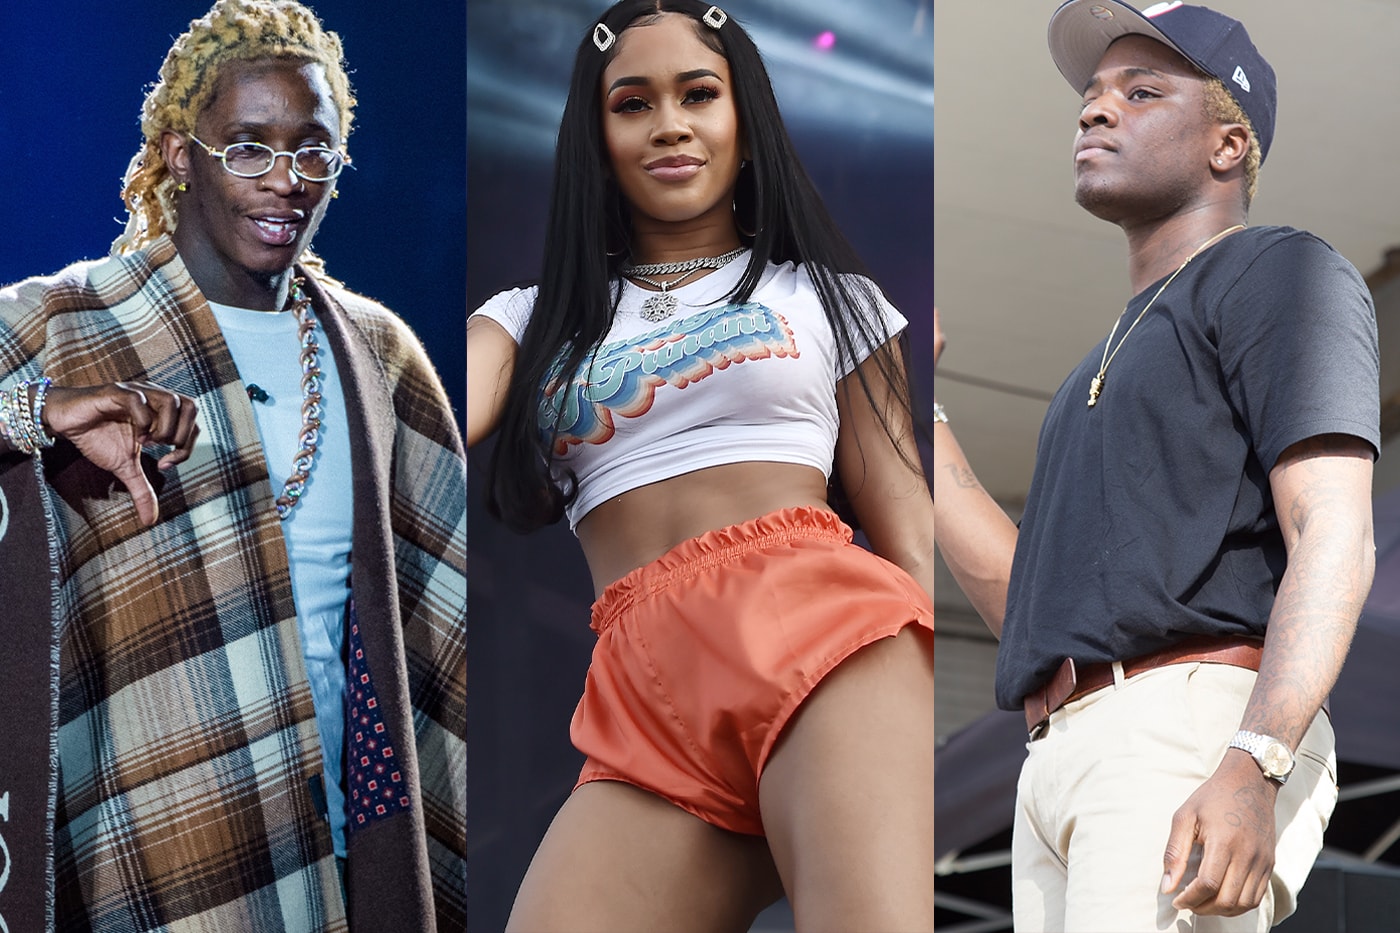 Best New Tracks Young Thug ysl records Saweetie Offset Patrick Paige II idk Pyrex Queen Naija  Ari Lennox  Allblack  kenny beats drakeo the ruler  Aj tracey  Kenny mason  cautious clay